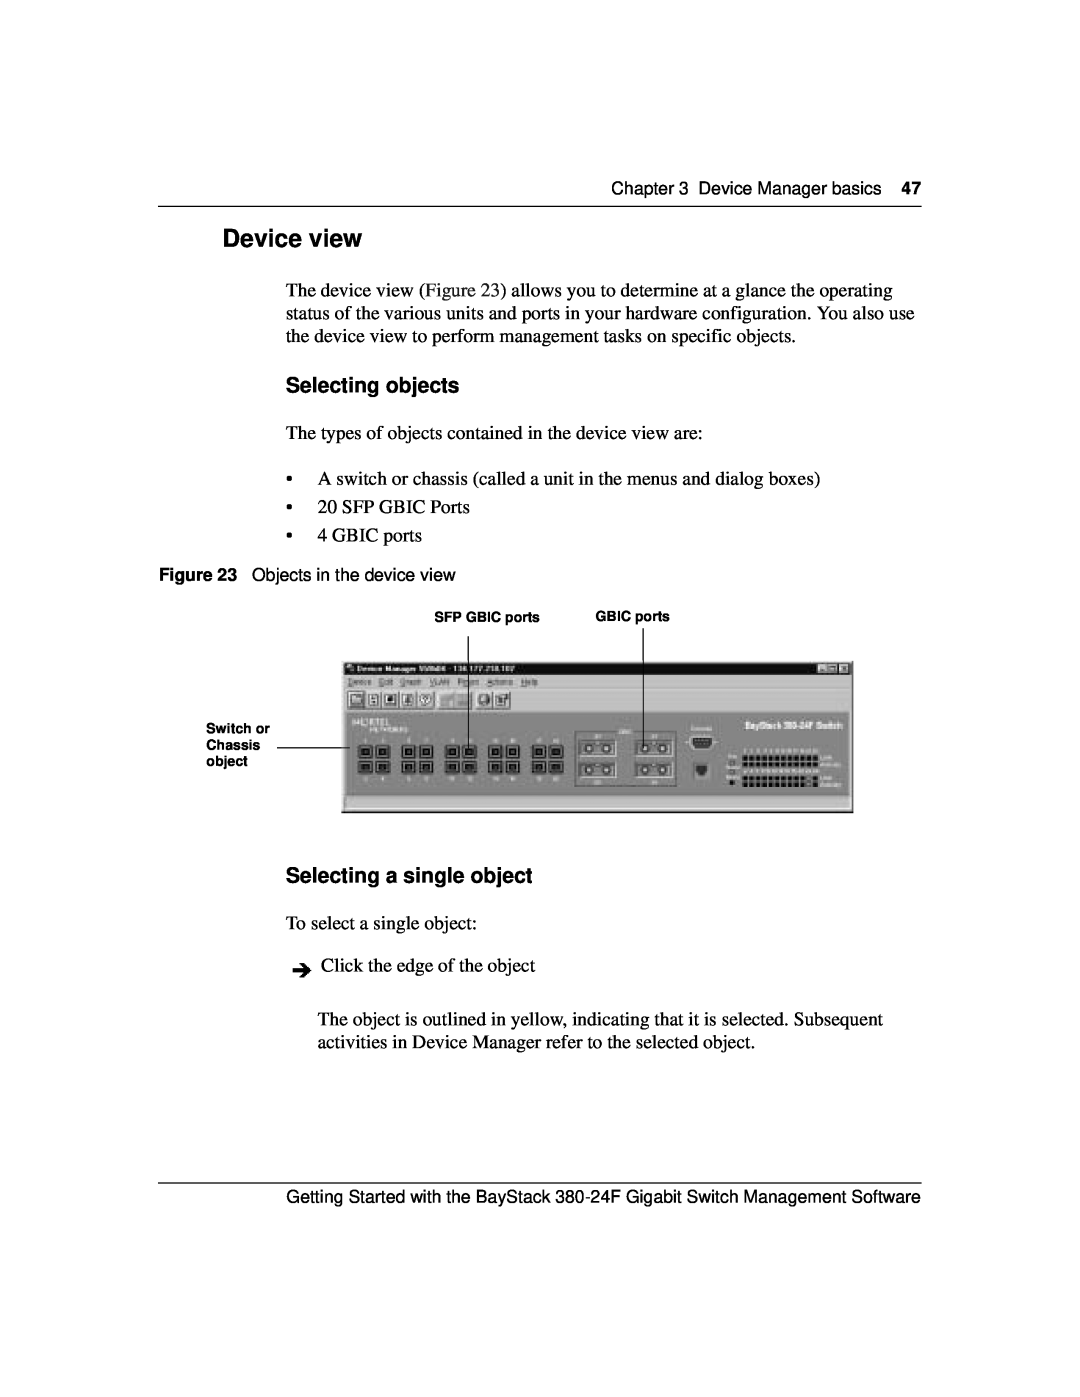 Nortel Networks 380-24F manual Device view, Selecting objects, Selecting a single object 